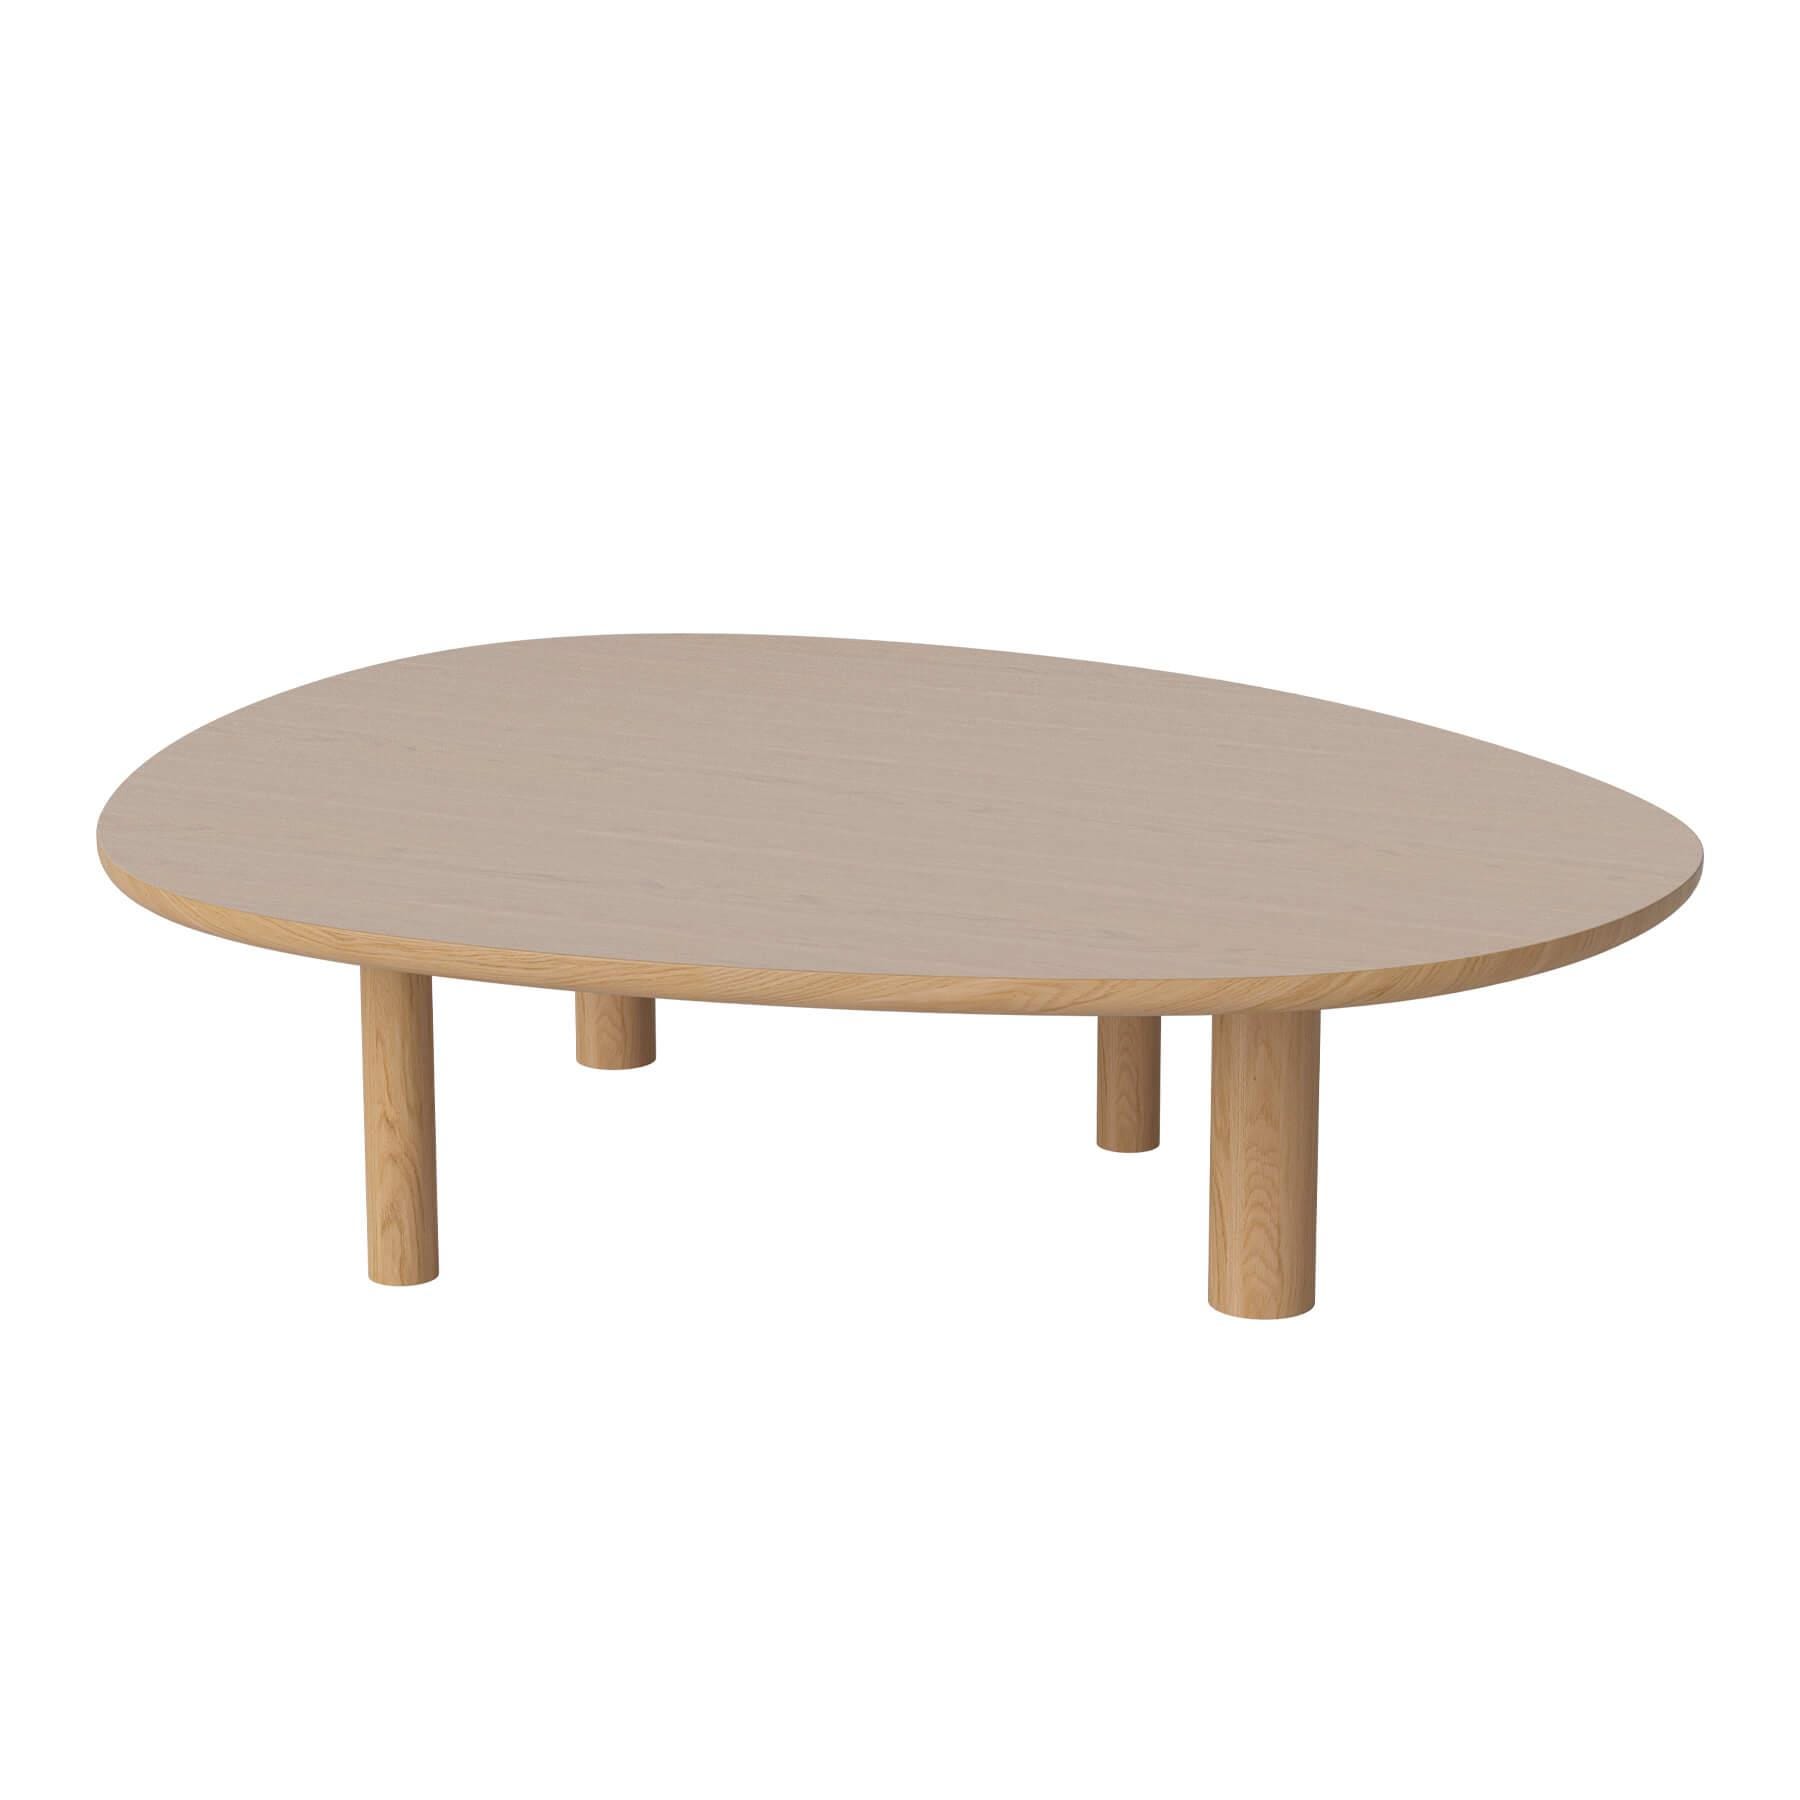 Bolia Latch Coffee Table Large Oiled Oak Light Wood Designer Furniture From Holloways Of Ludlow